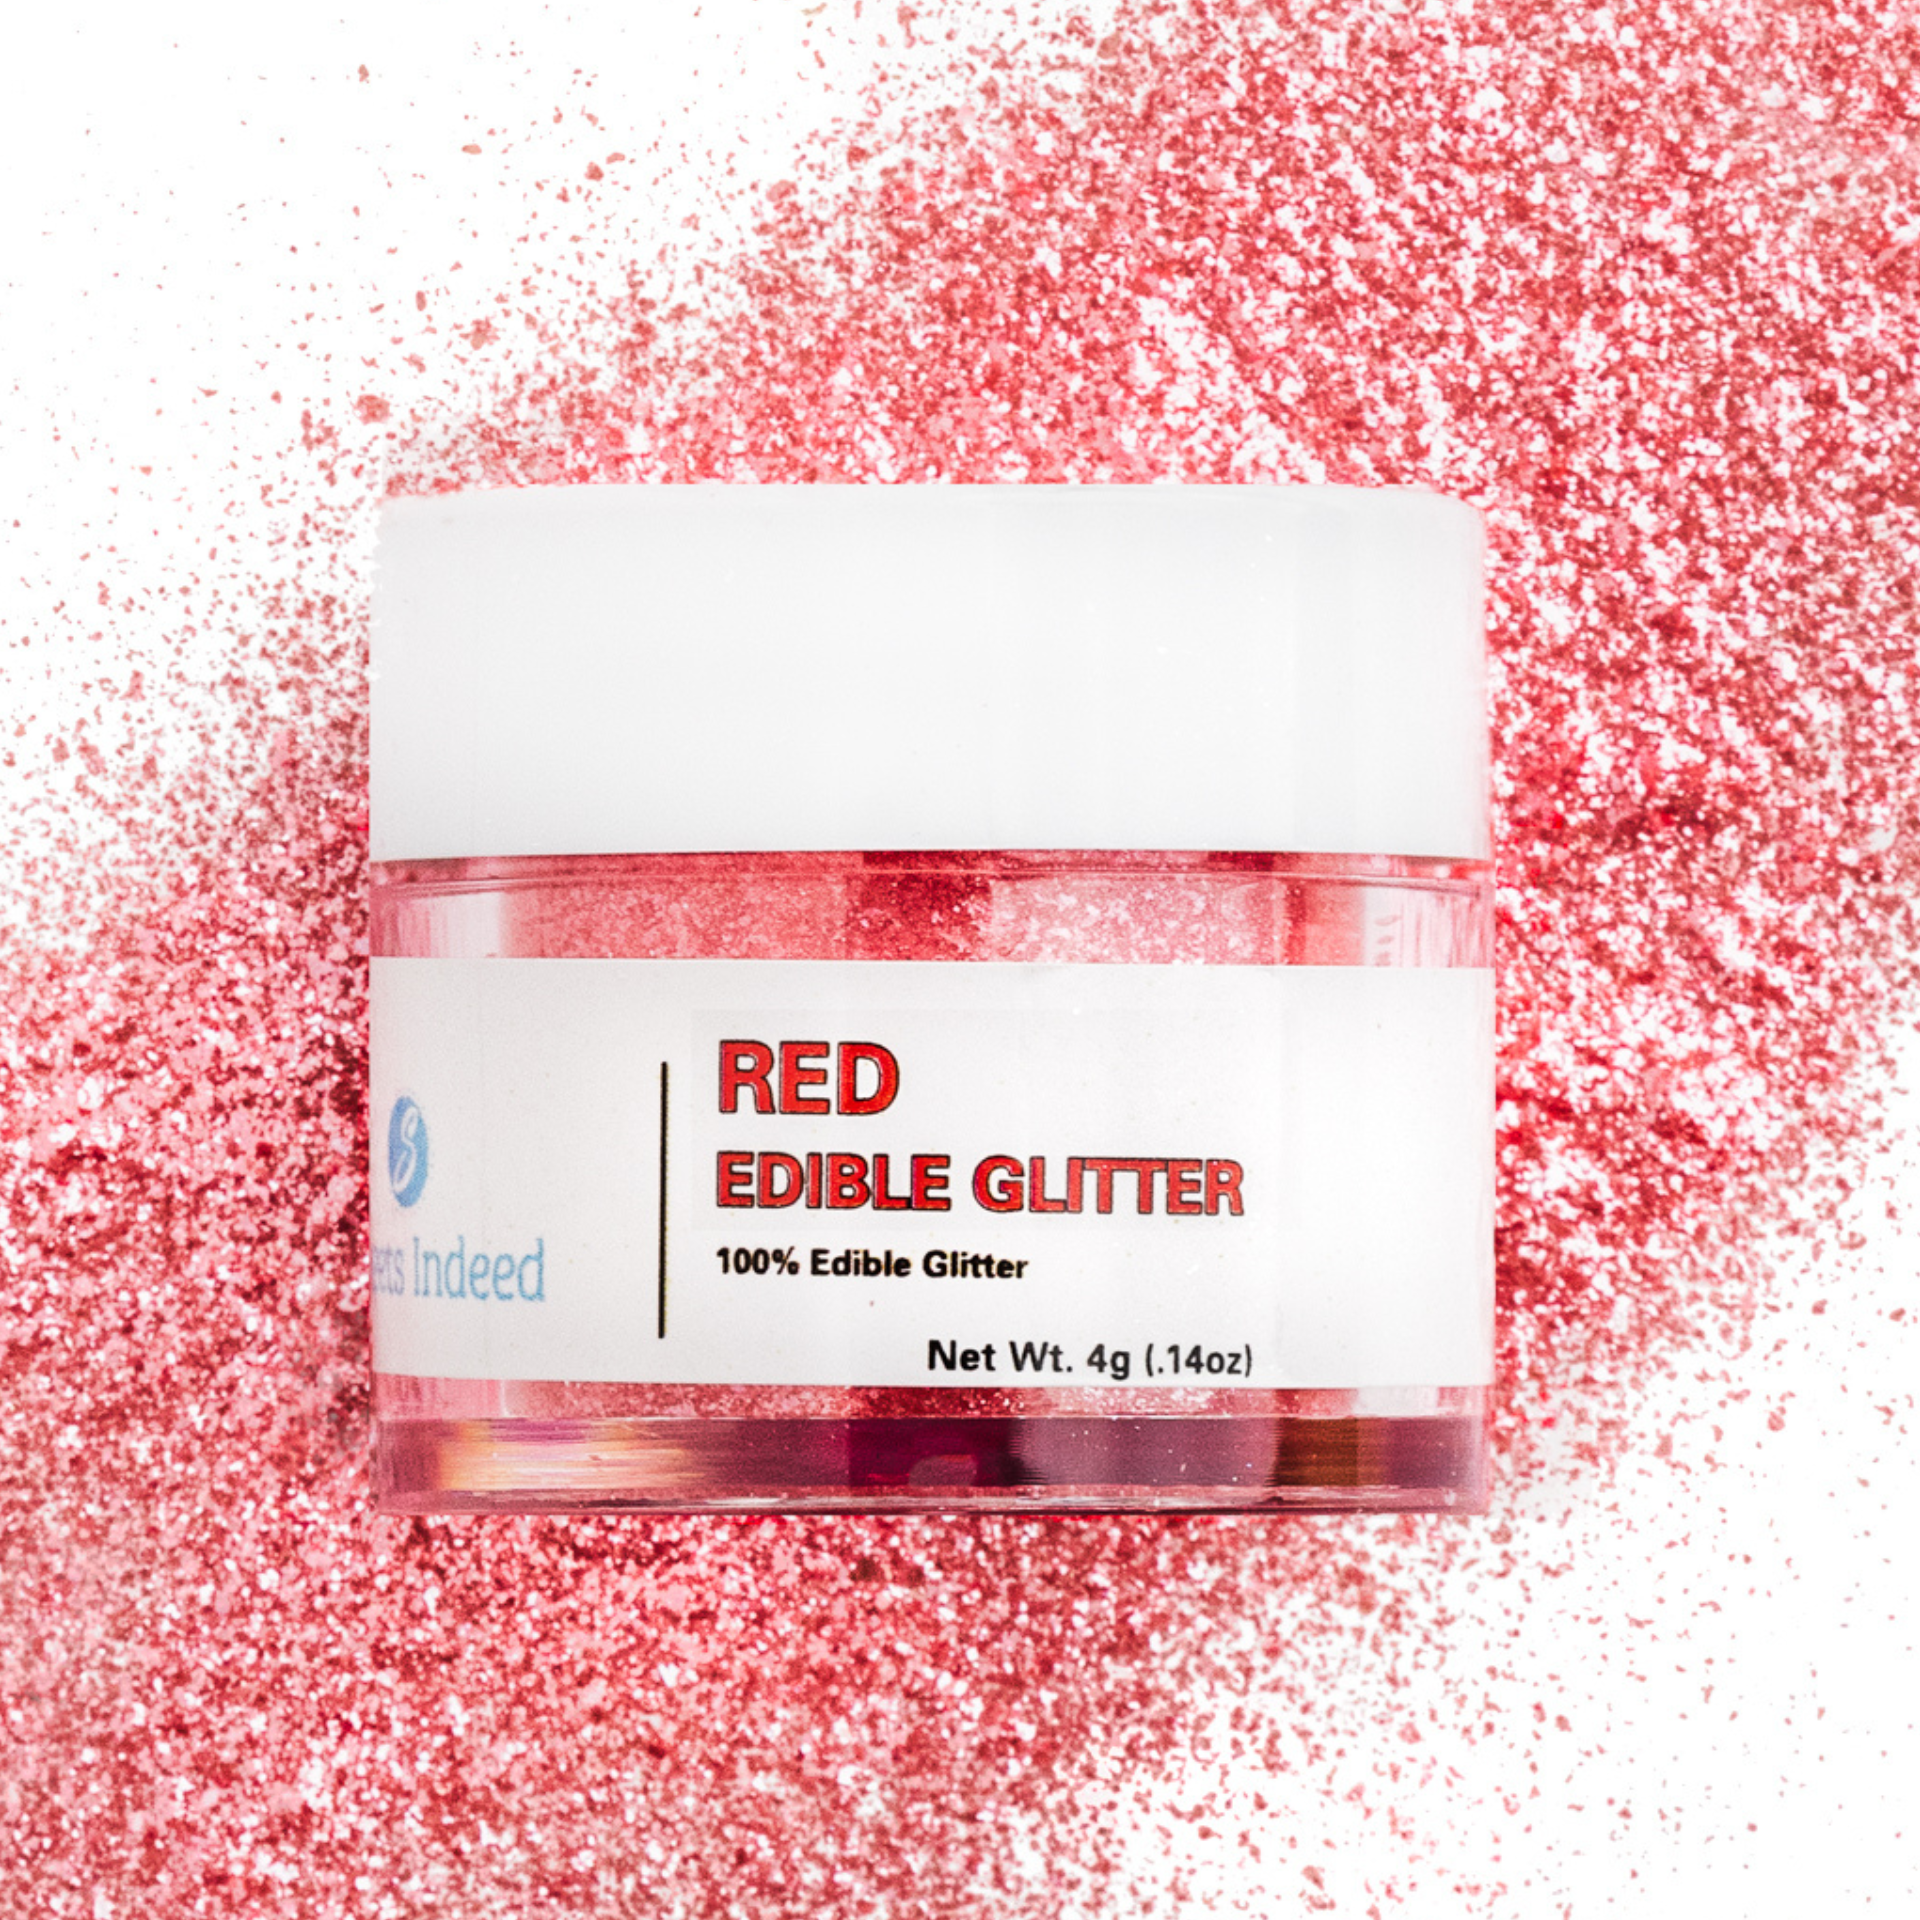 Edible Glitter With Natural Color, 3 Grams Garnet Red 